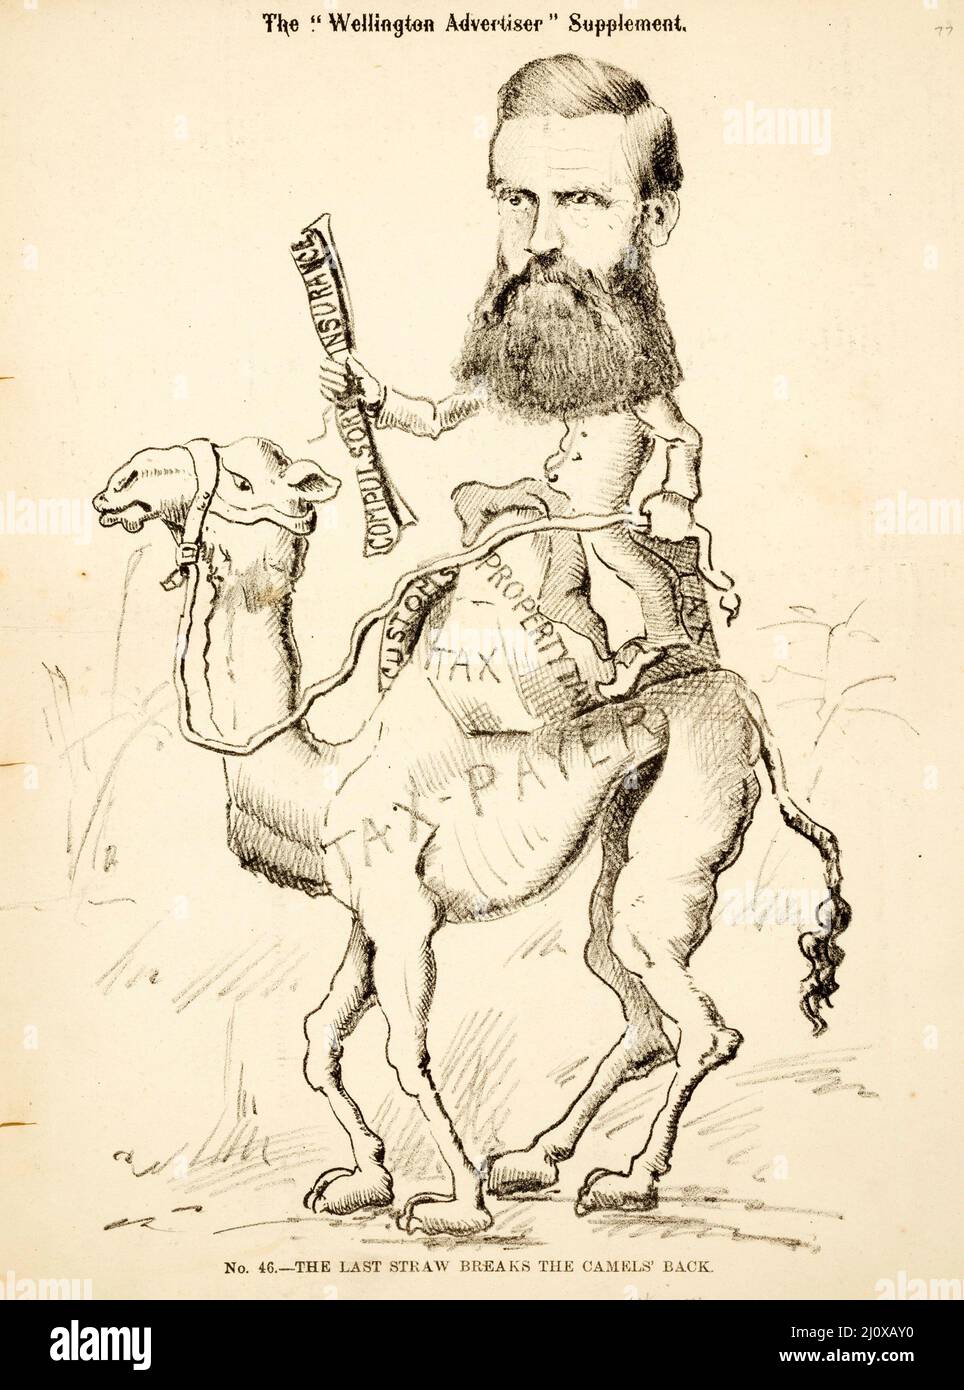 Sketch of the last straw that broke the camel's back before the 1881 general election in New Zealand, from a cartoon published in the Wellington Advertiser Supplement Stock Photo